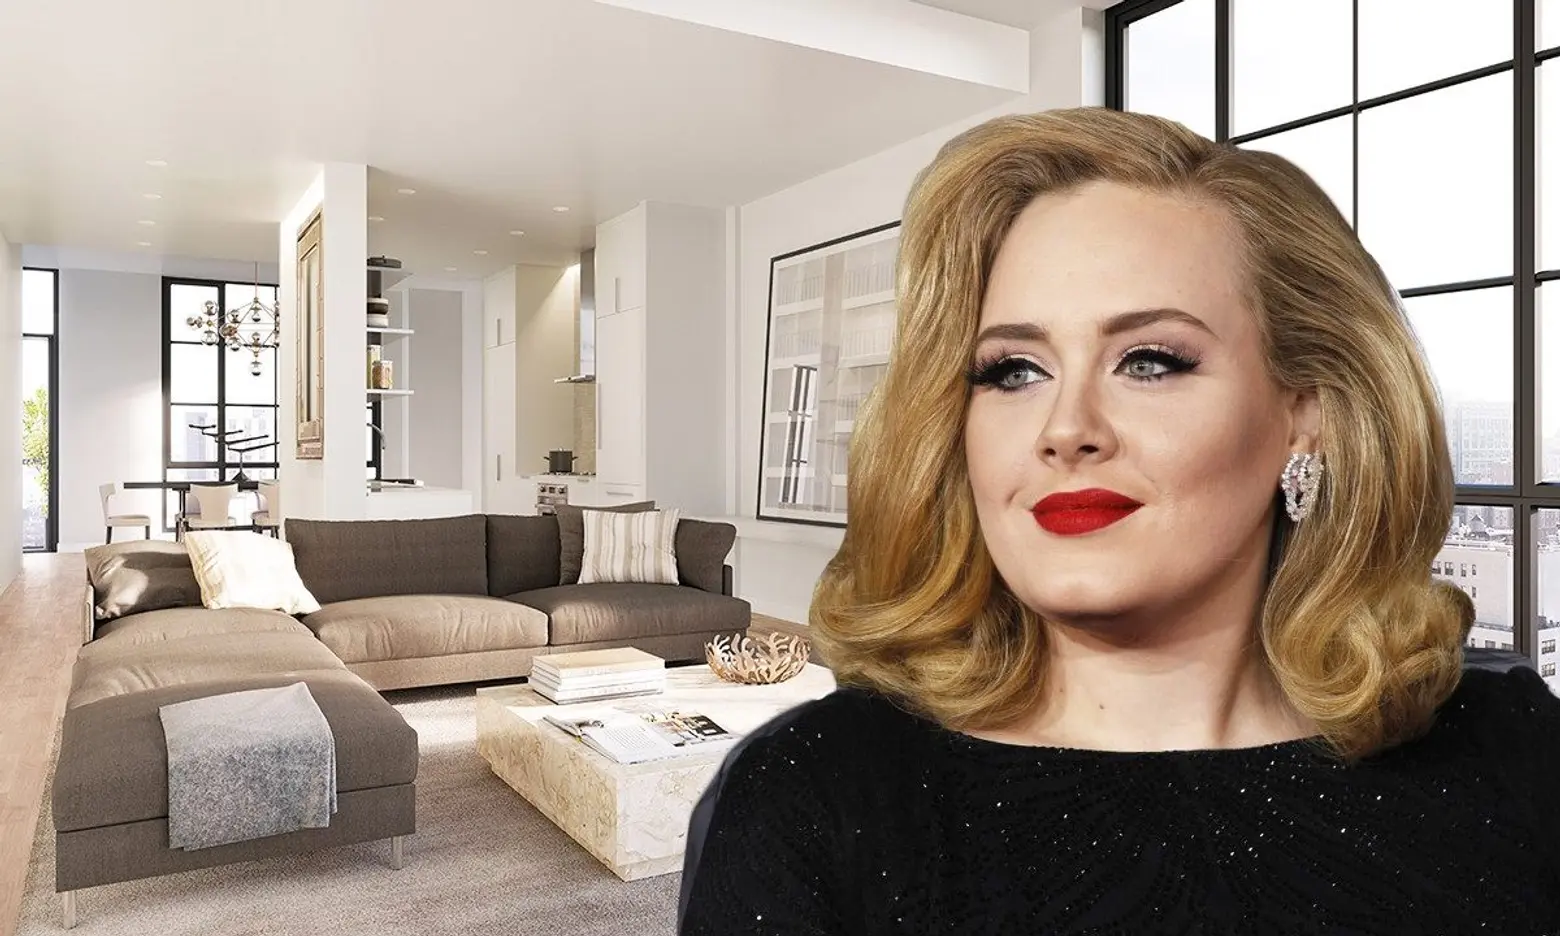 Adele might be saying ‘Hello’ to swanky Gramercy duplex